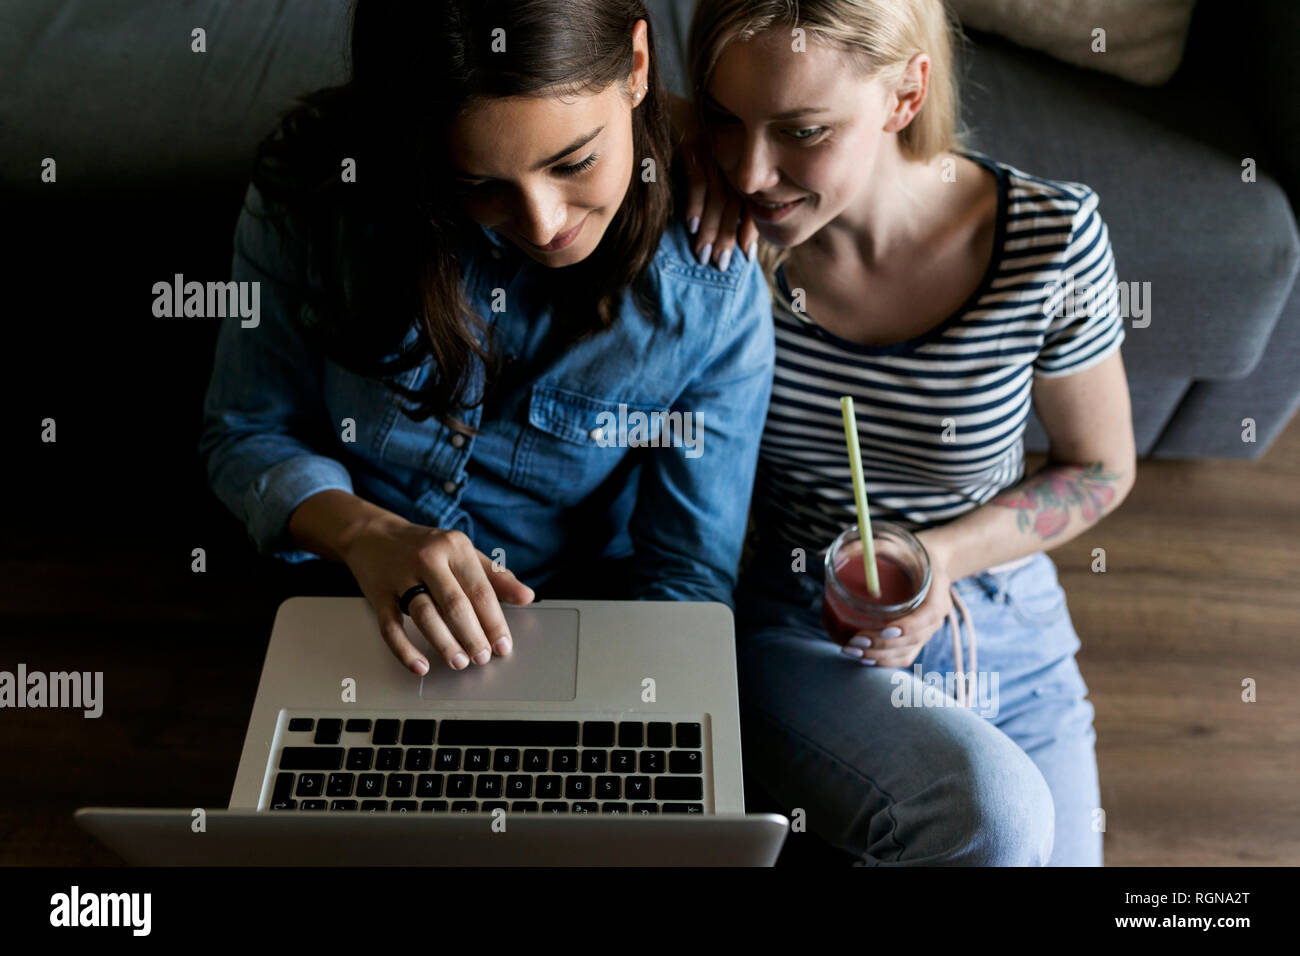 Two smiling young women sitting on floor with soft drink sharing laptop Stock Photo